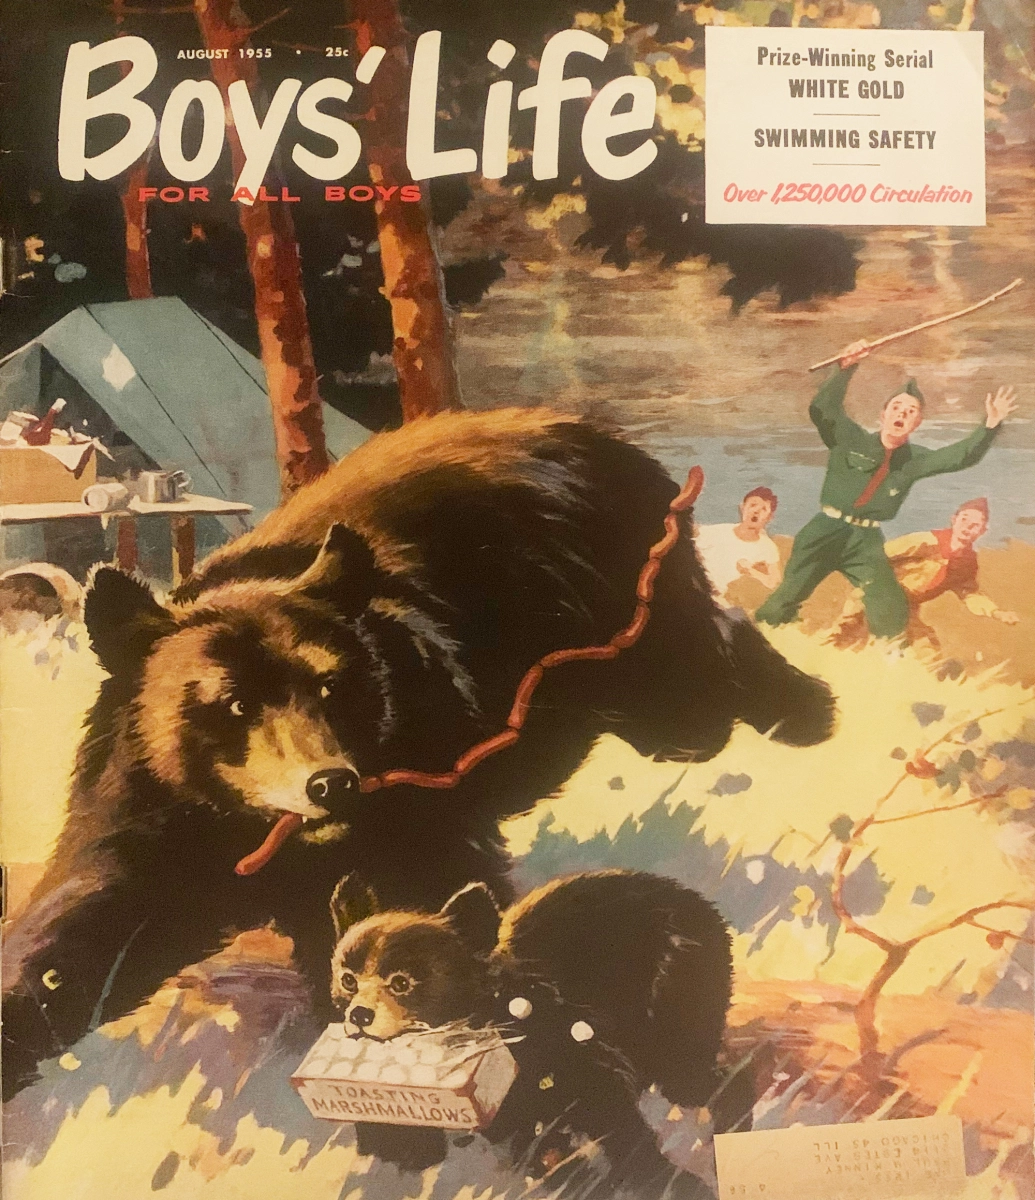 Boys' Life | August 1955 at Wolfgang's